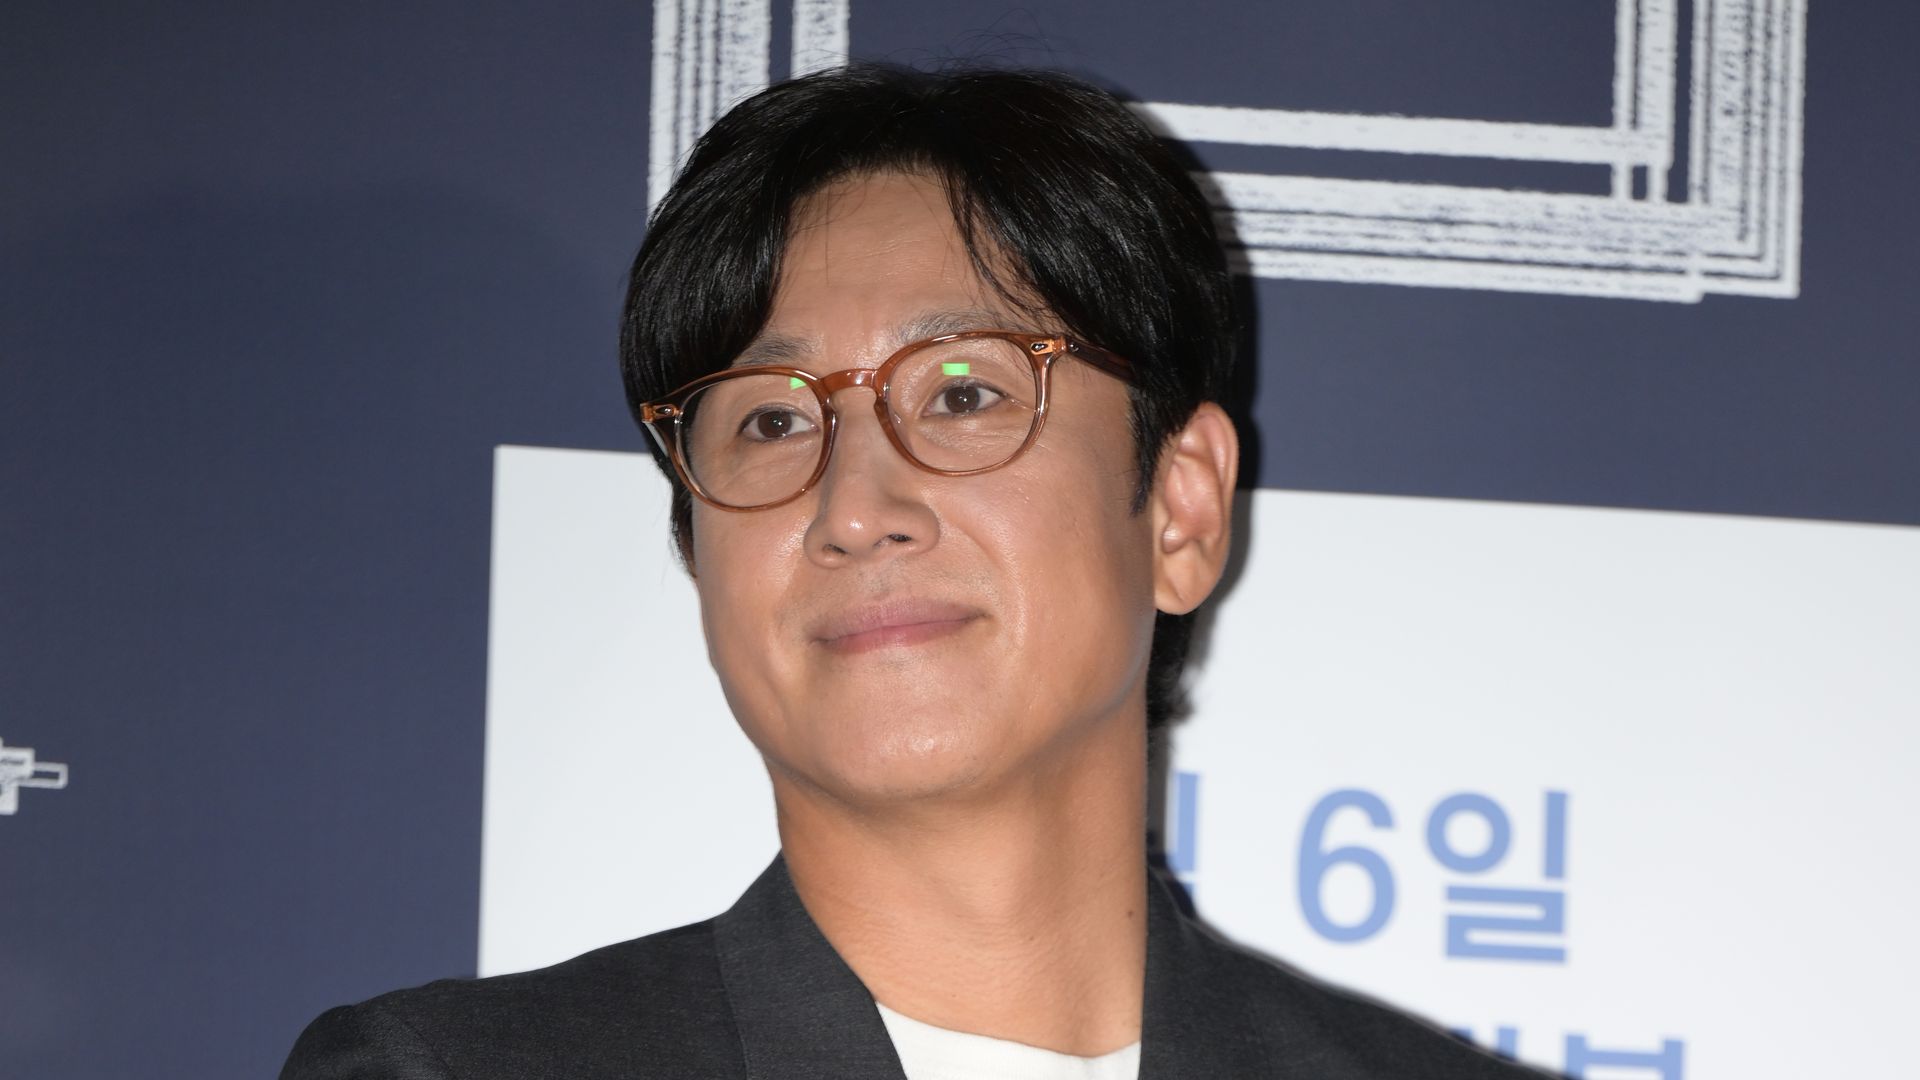 South Korean actor Lee Sun-kyun attends the VIP Premiere for a movie "Sleep" 